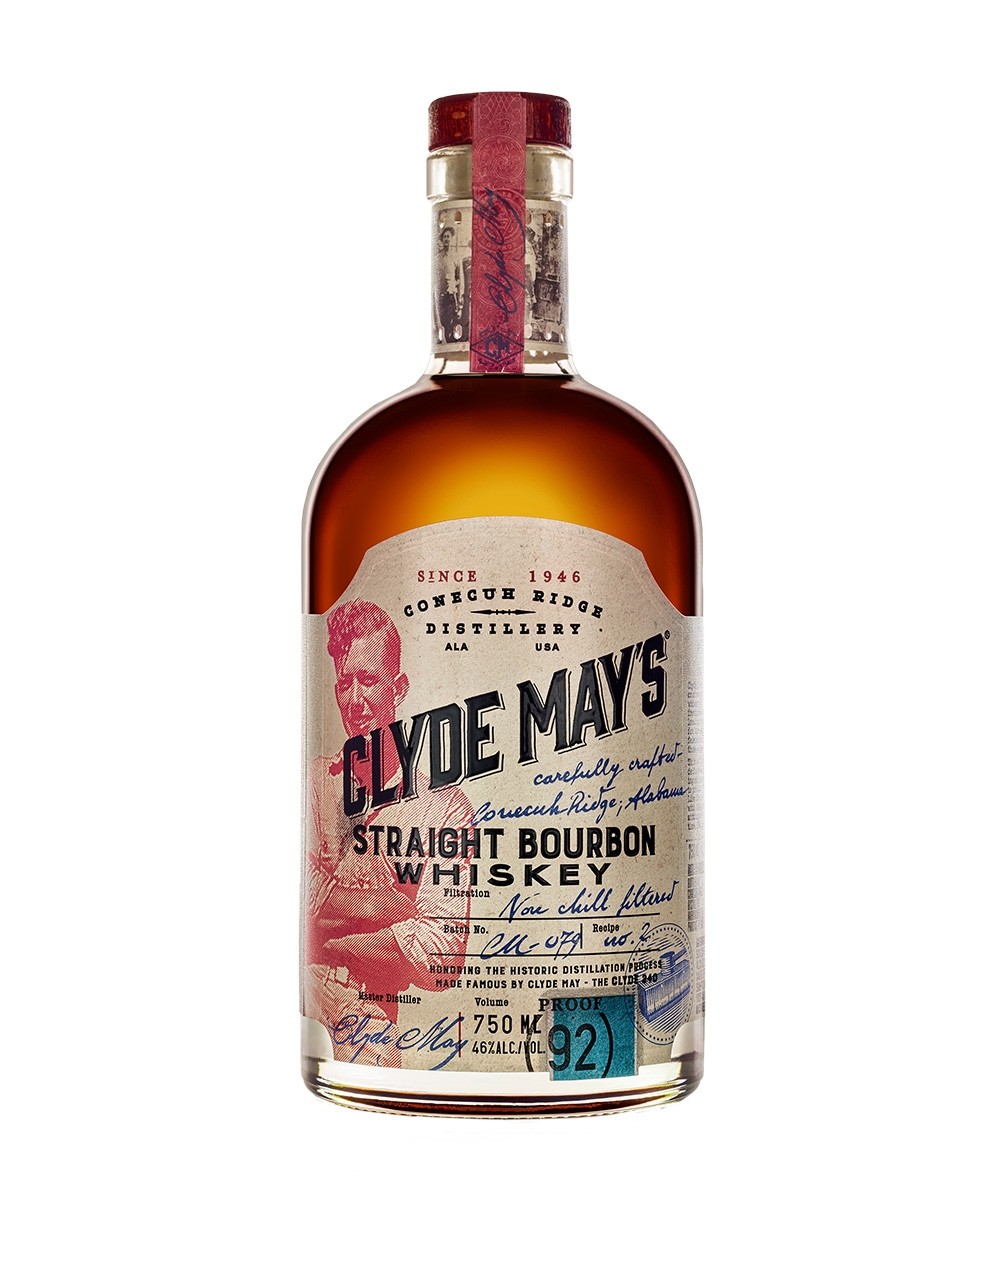 Clyde May’s Straight Bourbon Whiskey | Buy Online or Send